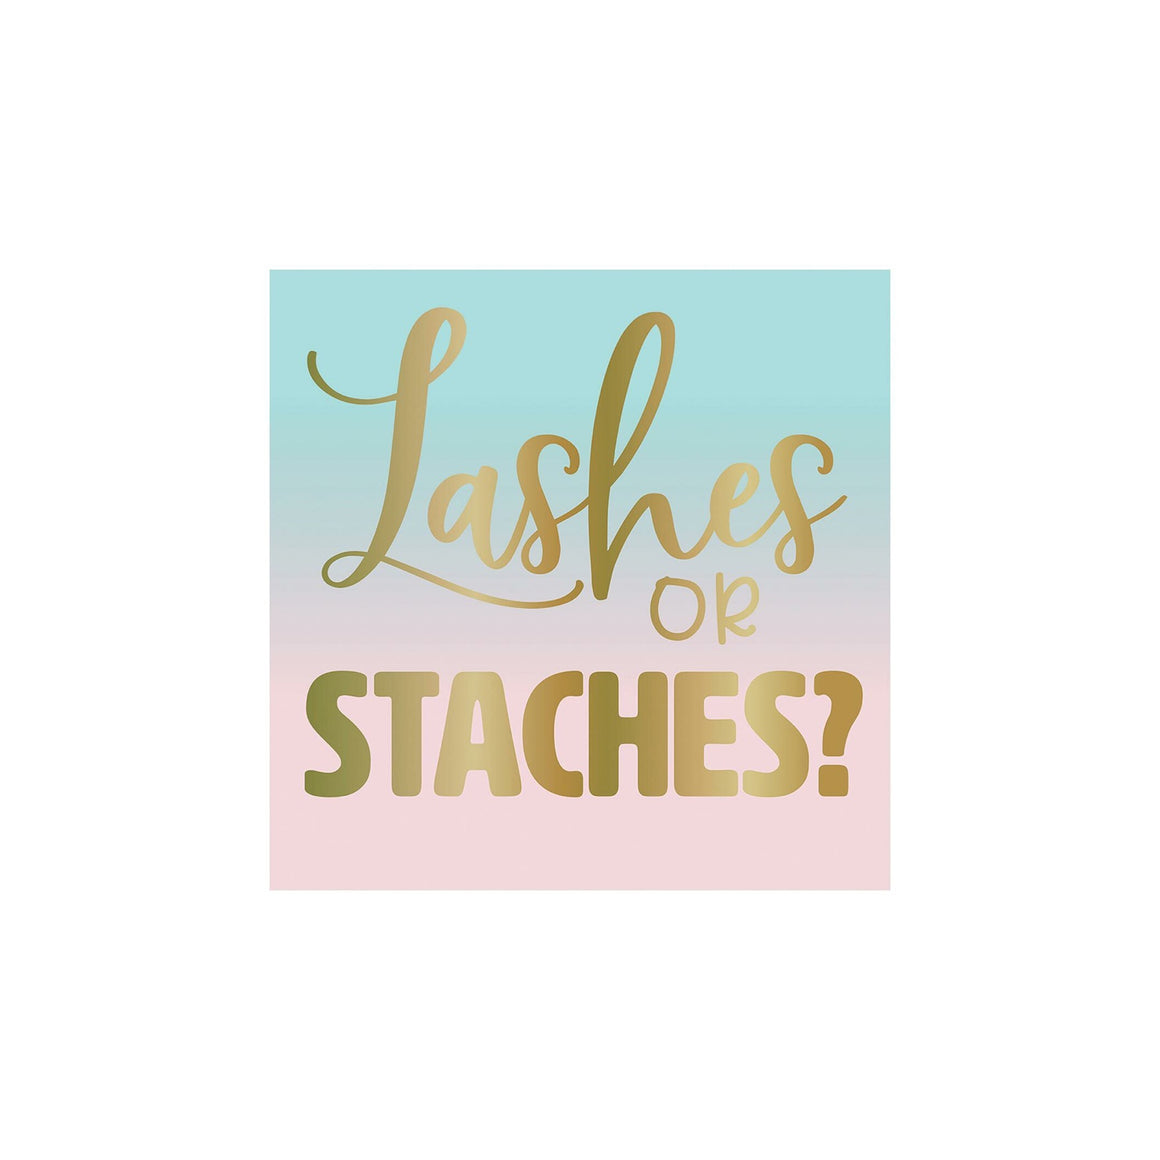 NAPKINS - SMALL LASHES OR STACHES ?